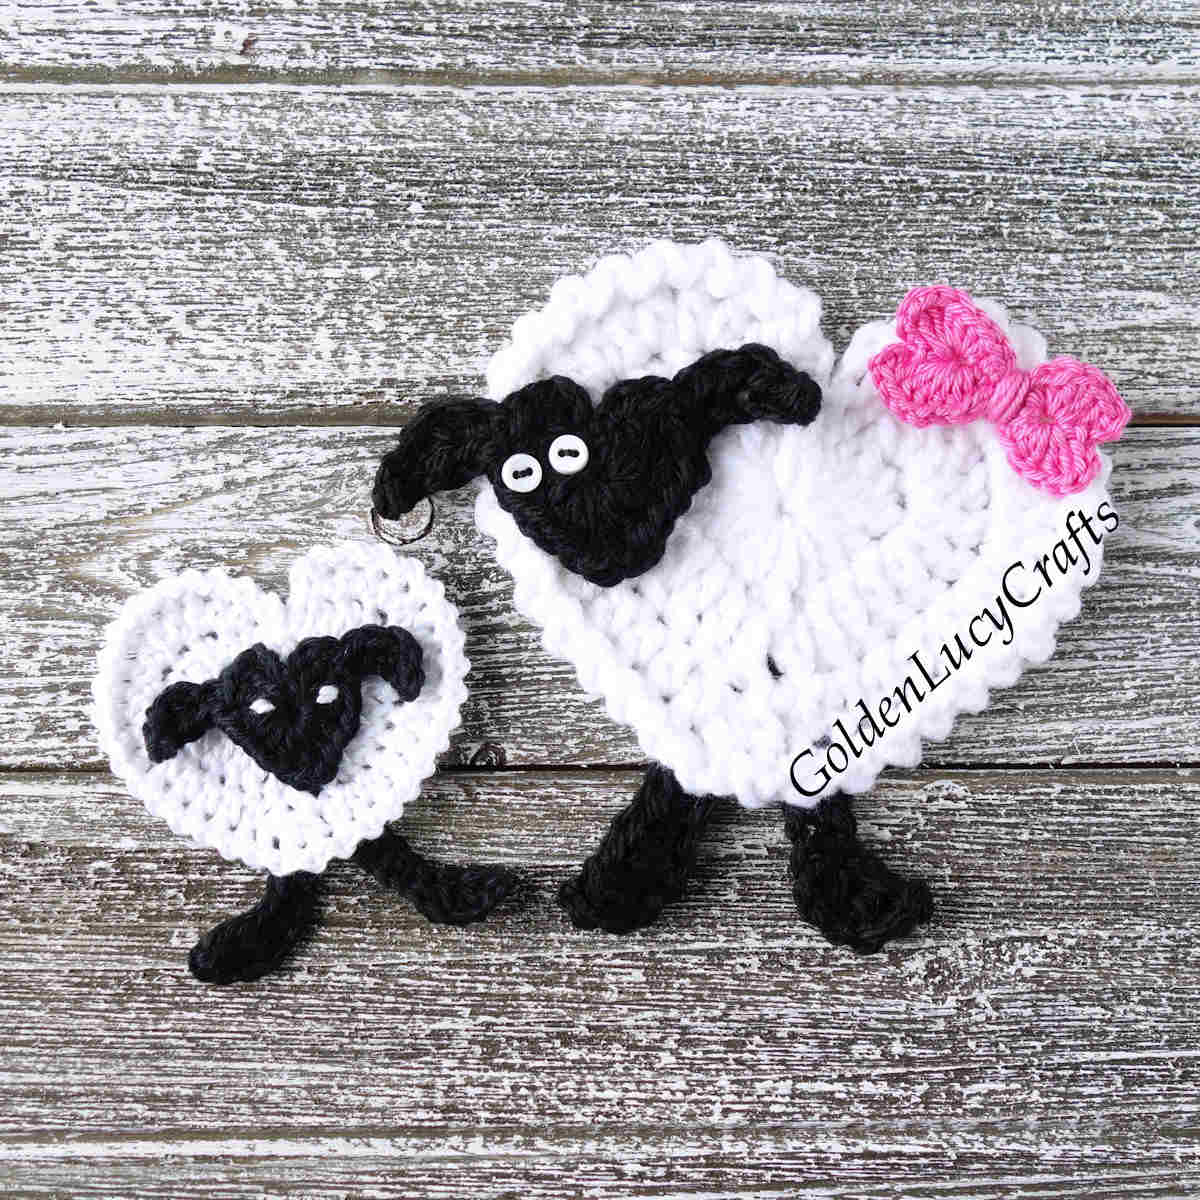 Two crocheted sheep appliques.